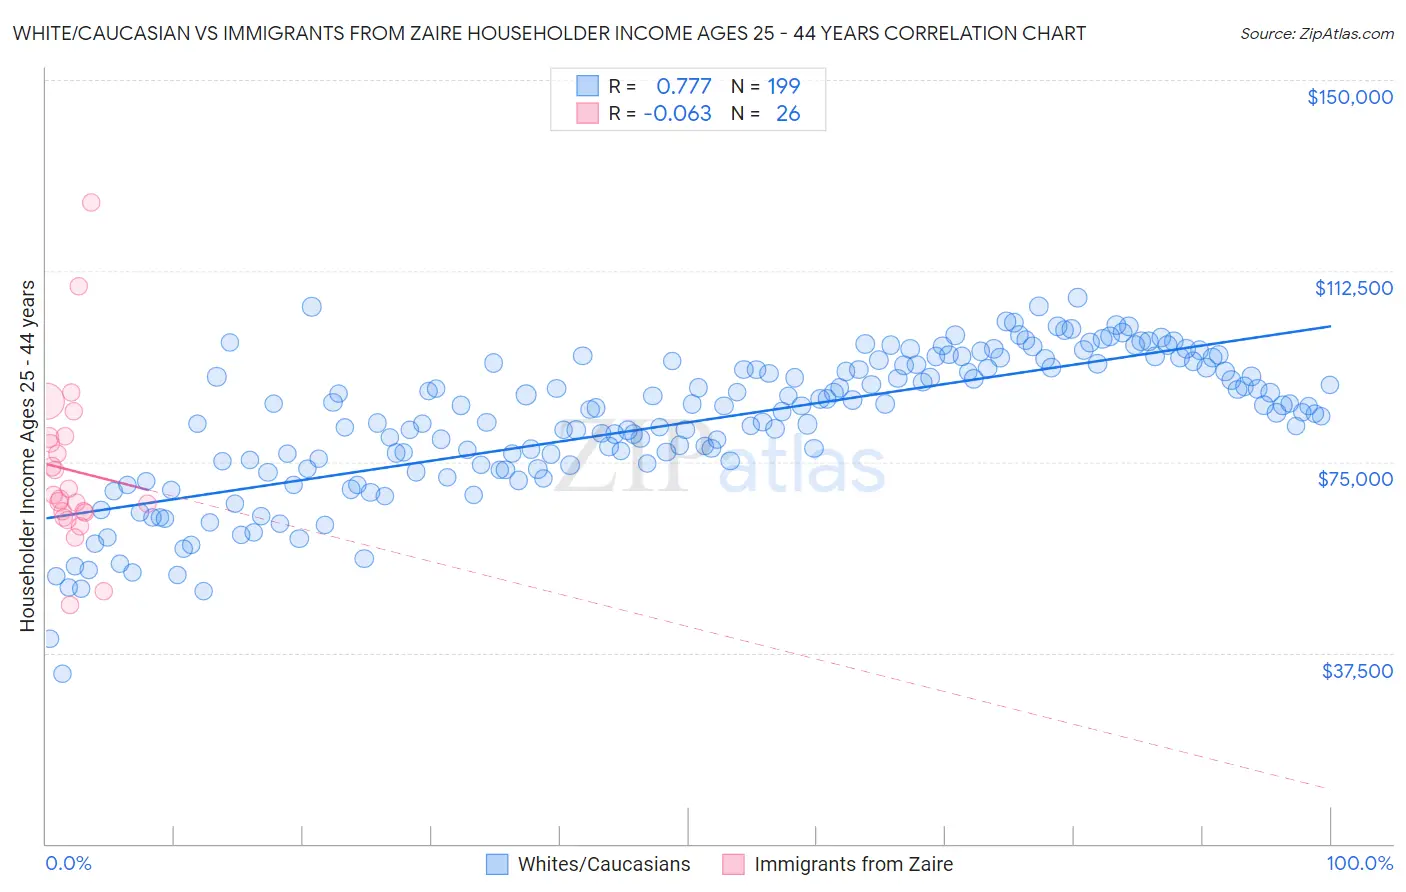 White/Caucasian vs Immigrants from Zaire Householder Income Ages 25 - 44 years